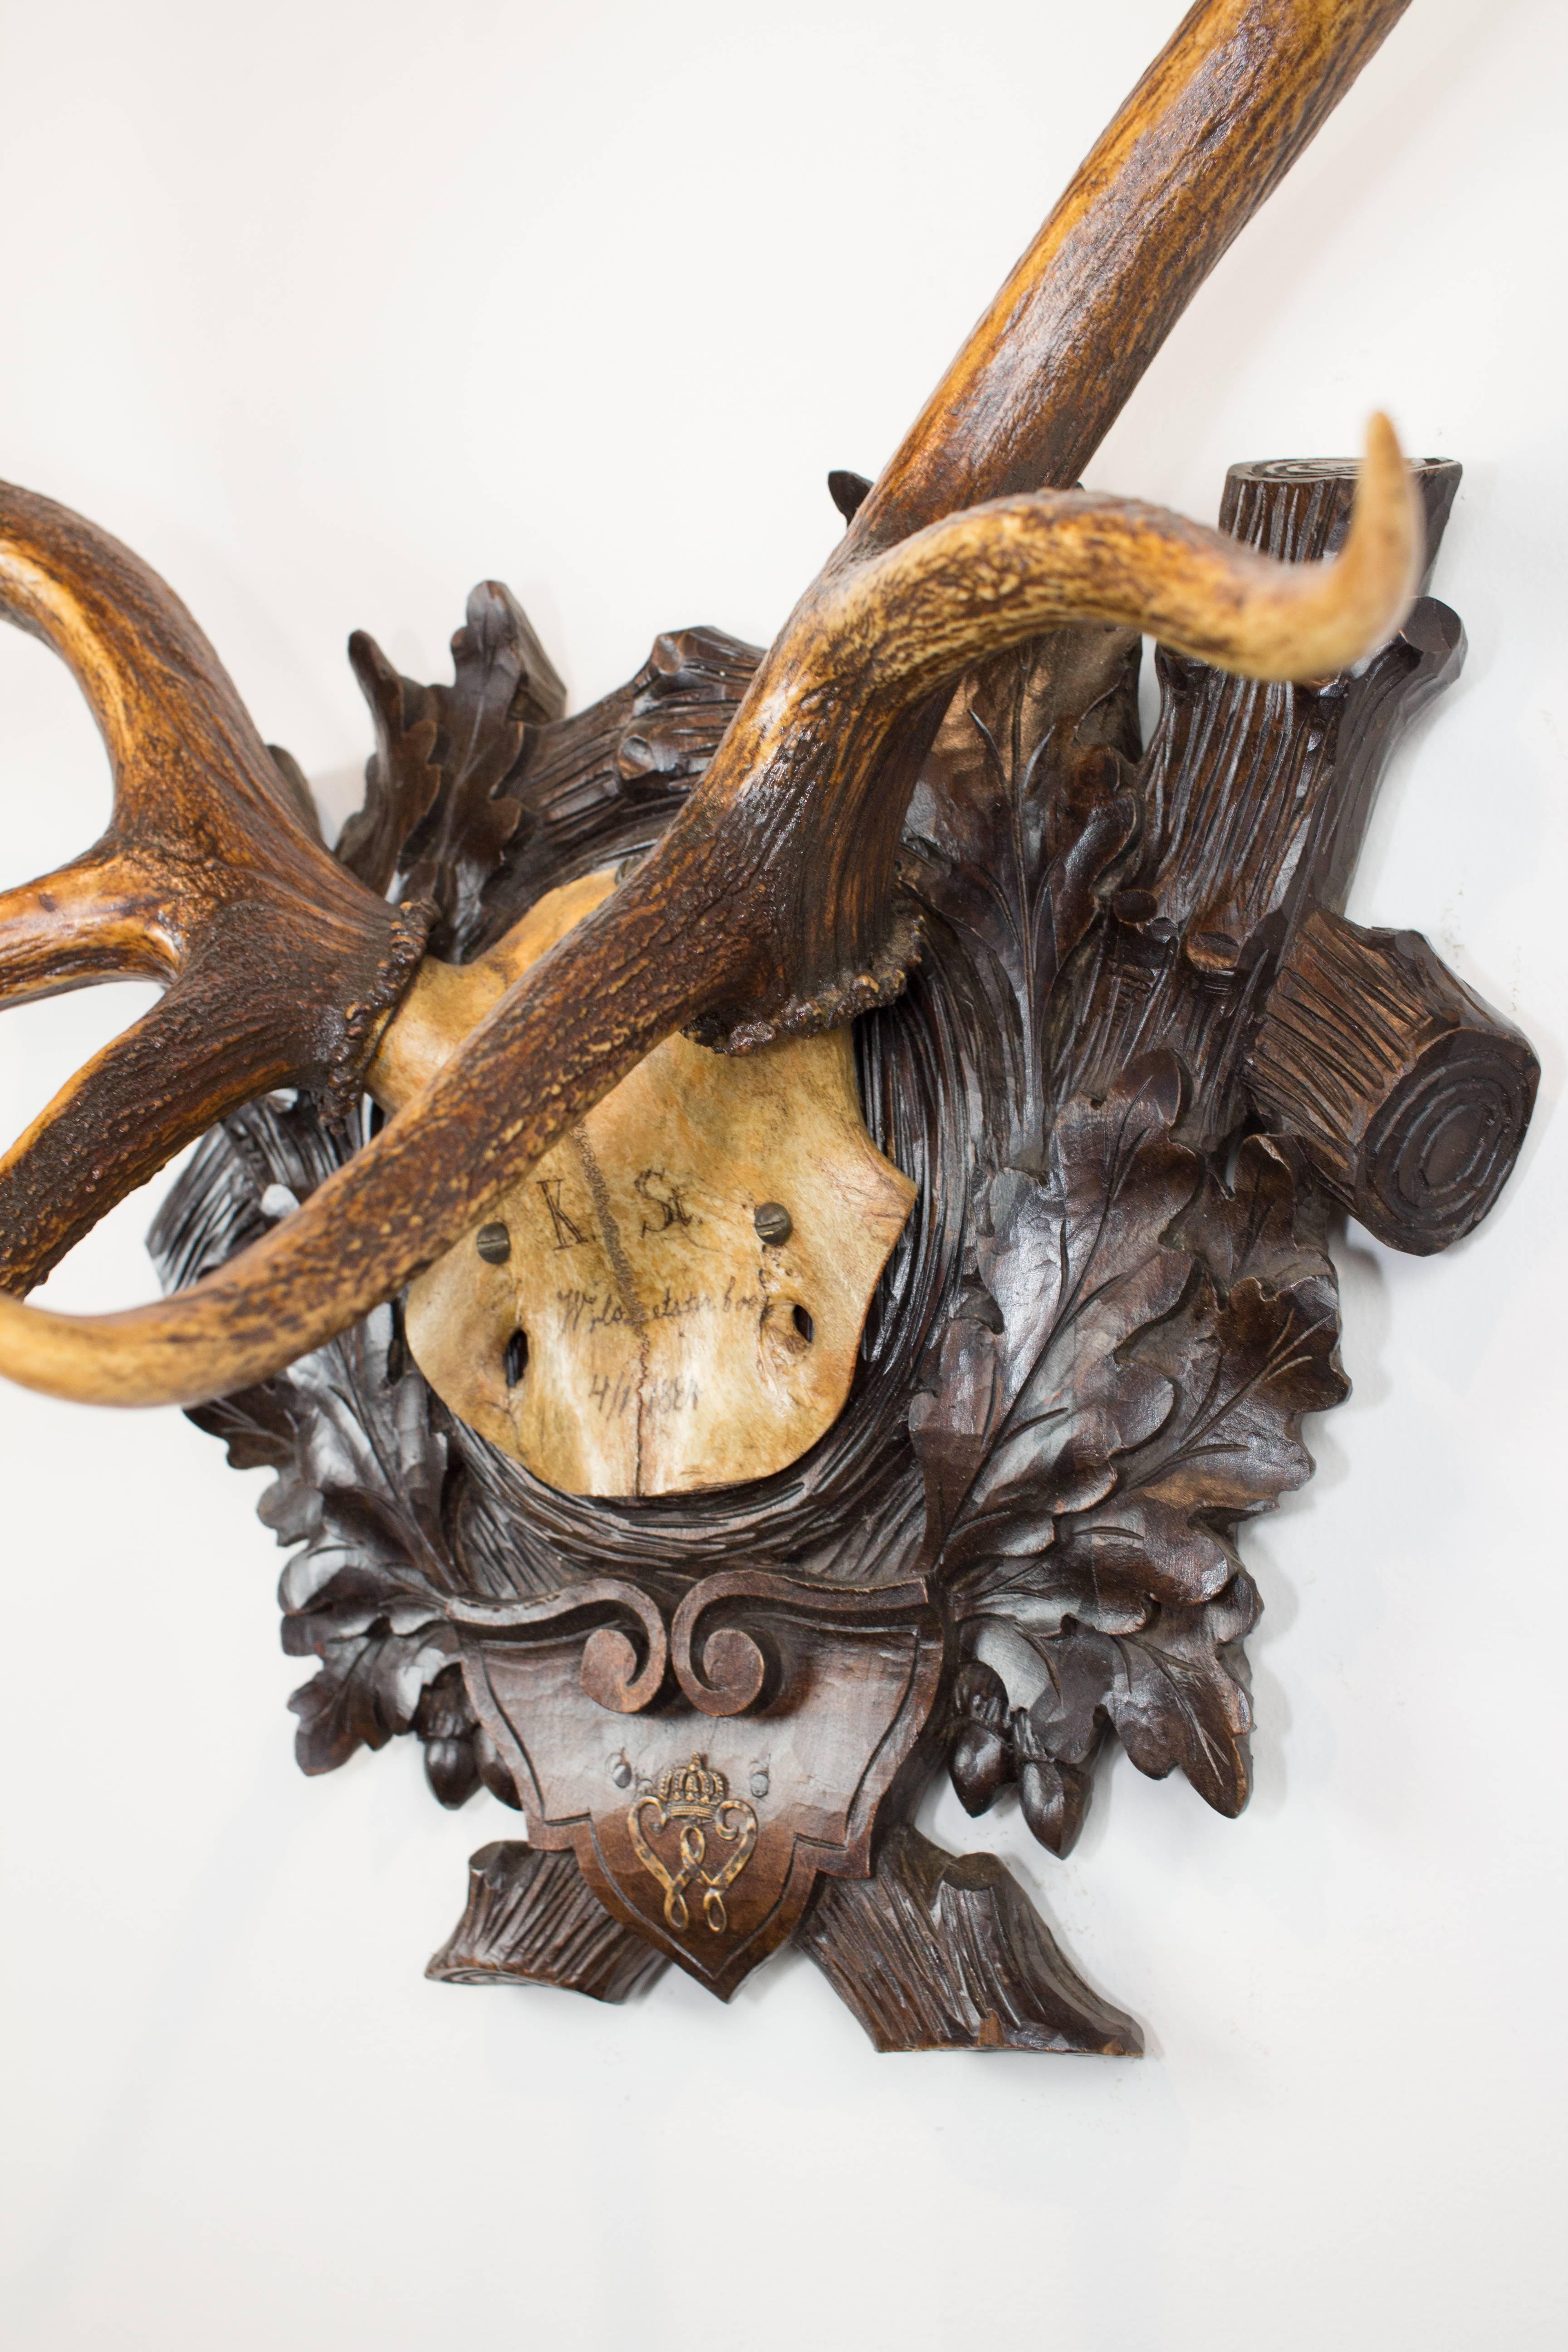 A truly special piece in the collection, this German red stag includes writing on the skull cap featuring a date of 1884 and includes the original Black Forest hand-carved plaque and golden wappen of Kaiser Wilhelm I of Germany.

Plaque measures